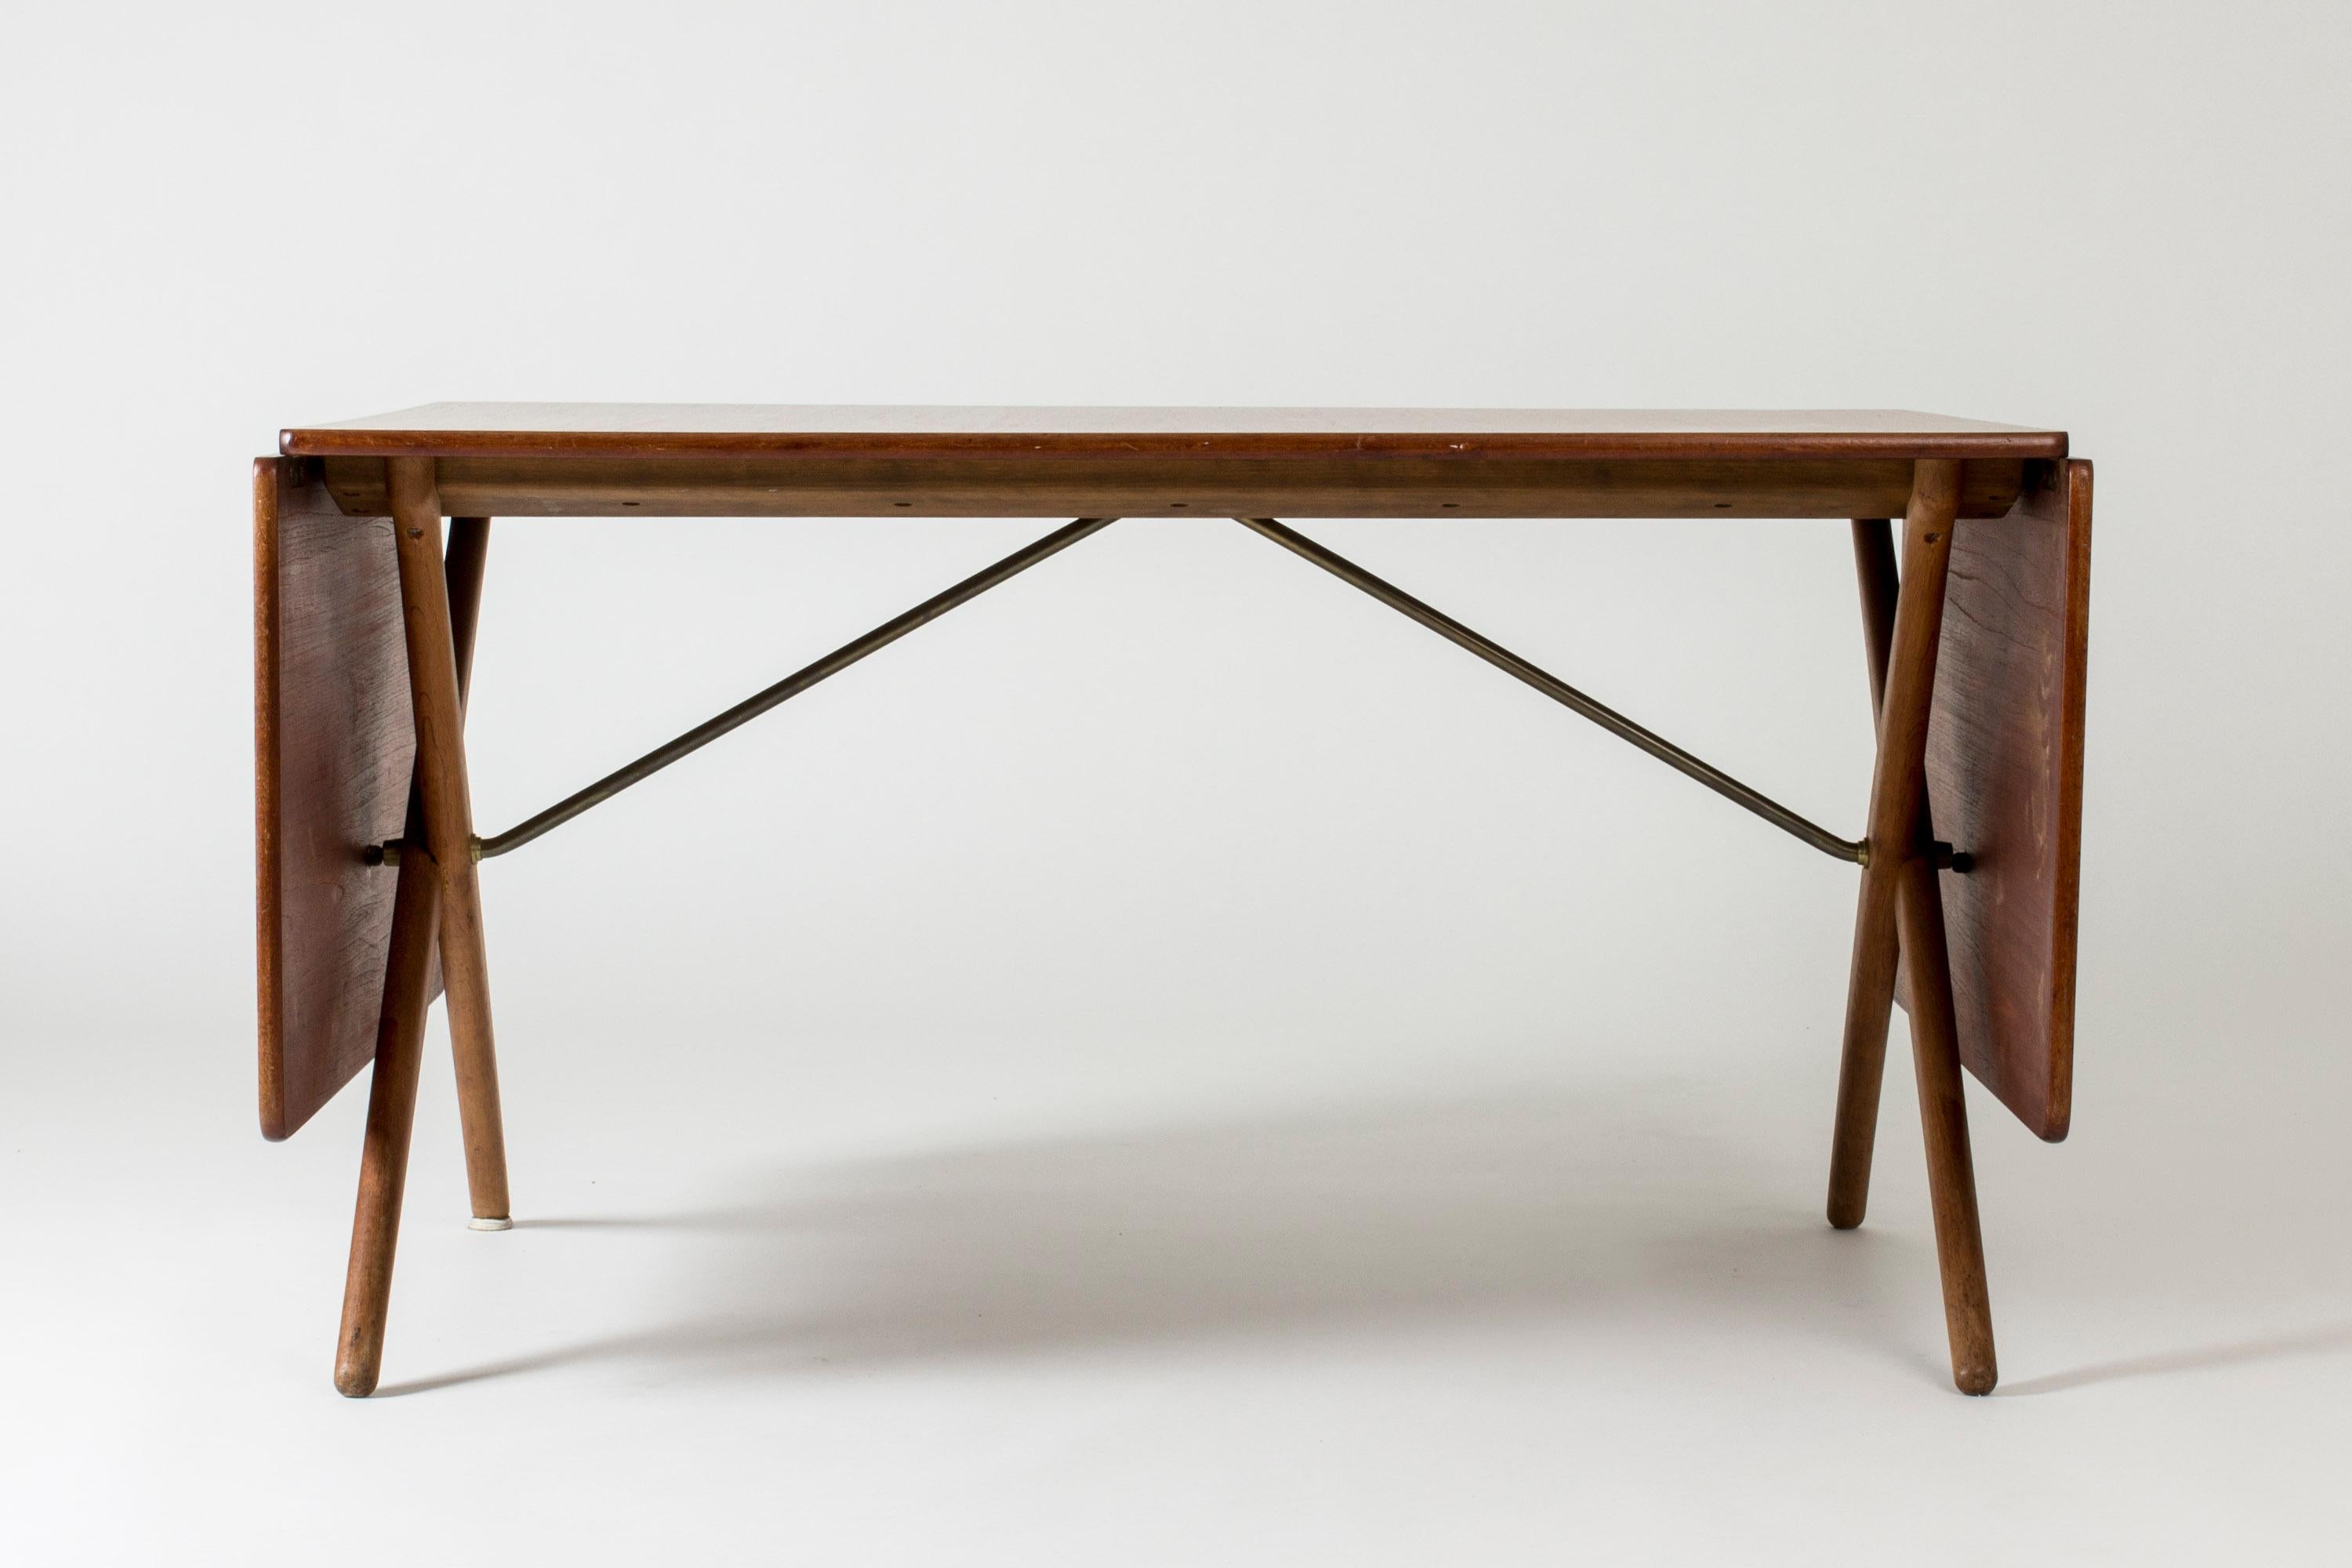 Cool “AT 303” dining table by Hans J. Wegner, with elegantly crossed legs. Made teak with oak legs. Drop leaves on each side make it a very versatile table.